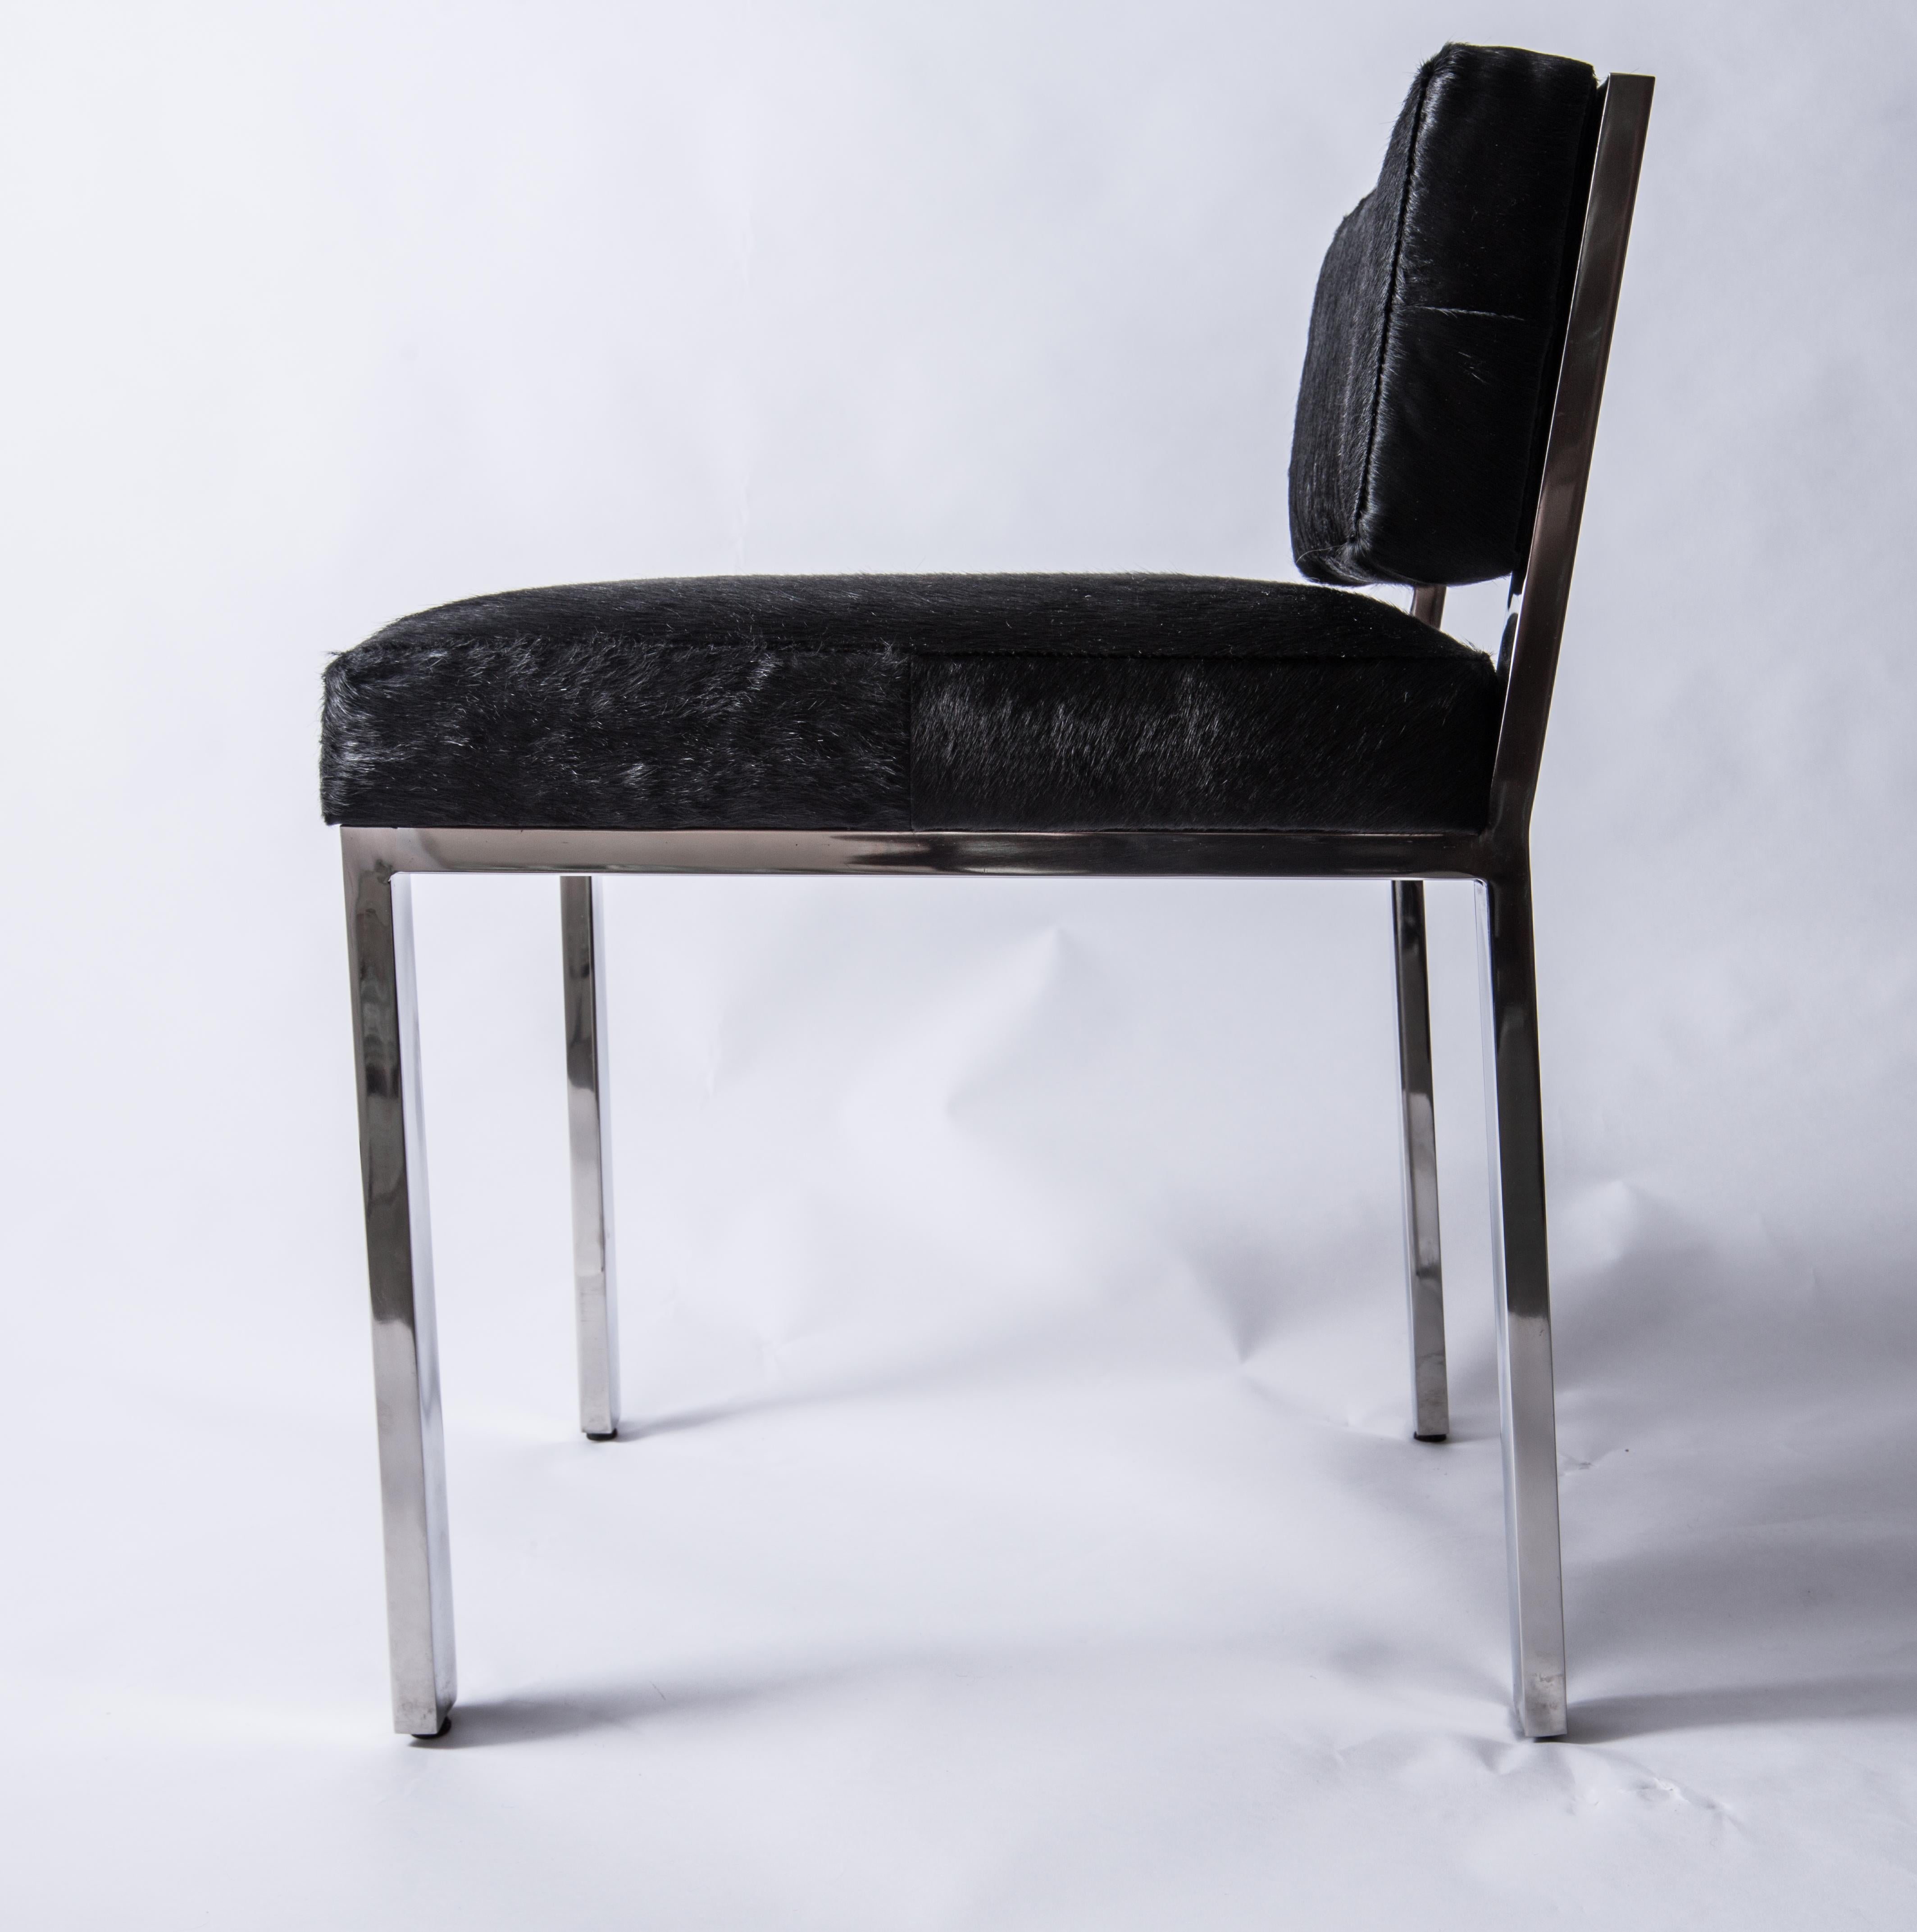 A cow hide stool/vanity seat by Global Views. Supported by a chrome structure. Back and seat are cushioned and upholstered in soft black horsehair.